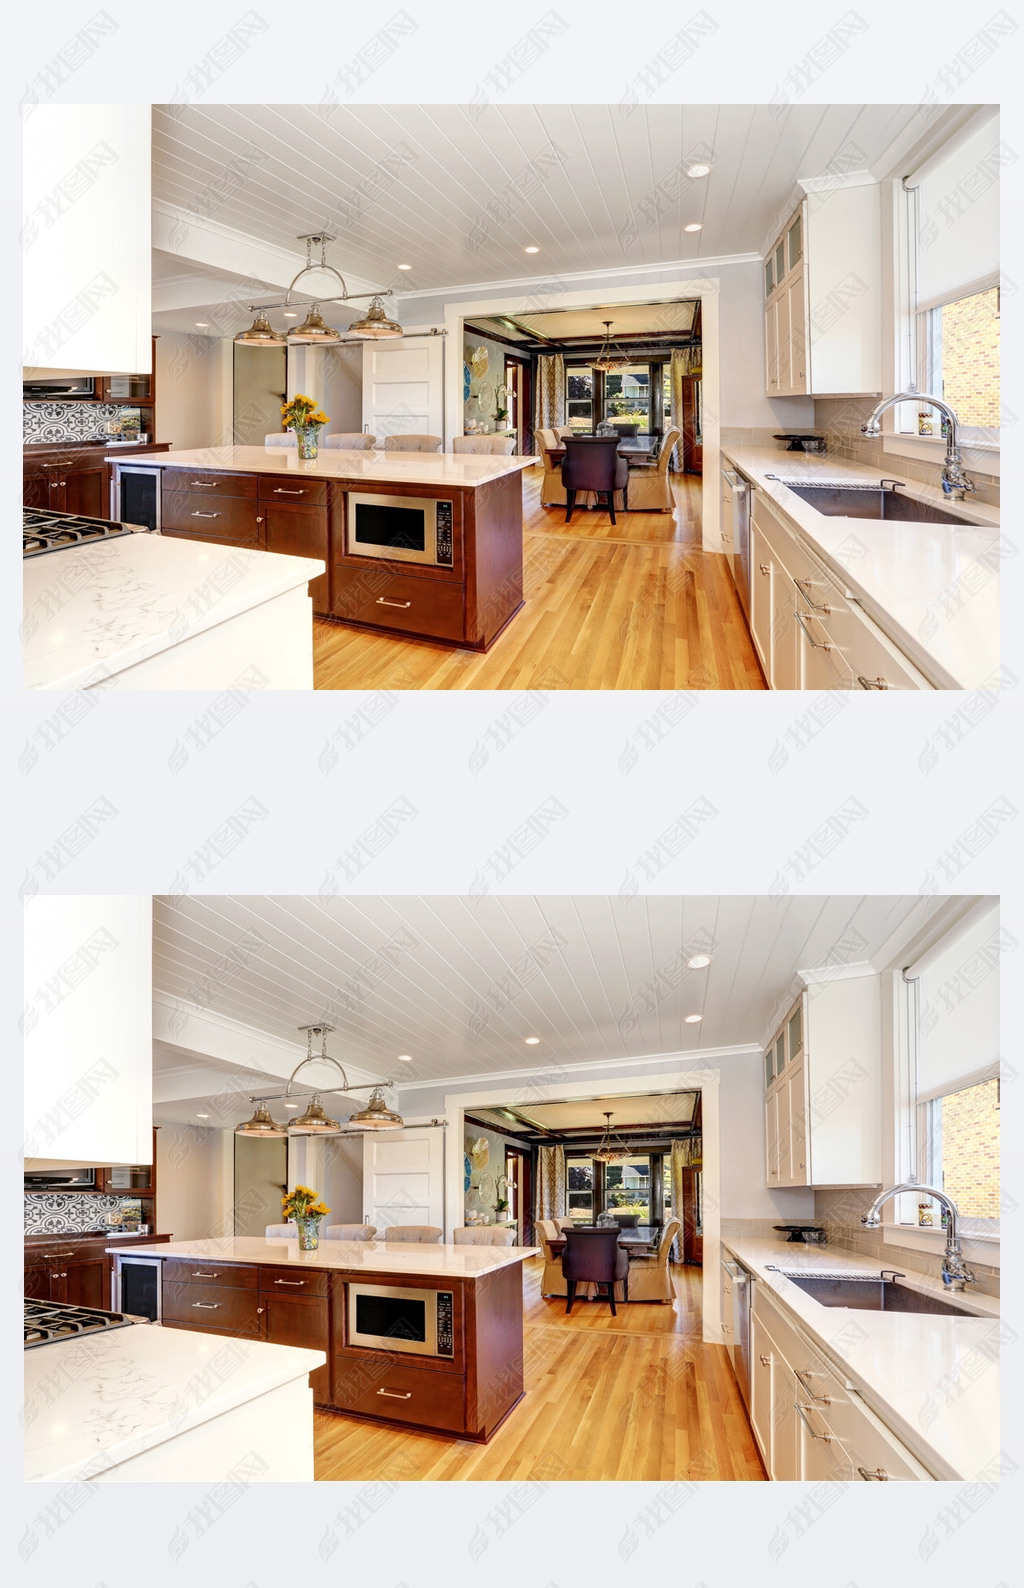 White interior of kitchen room with large kitchen island.